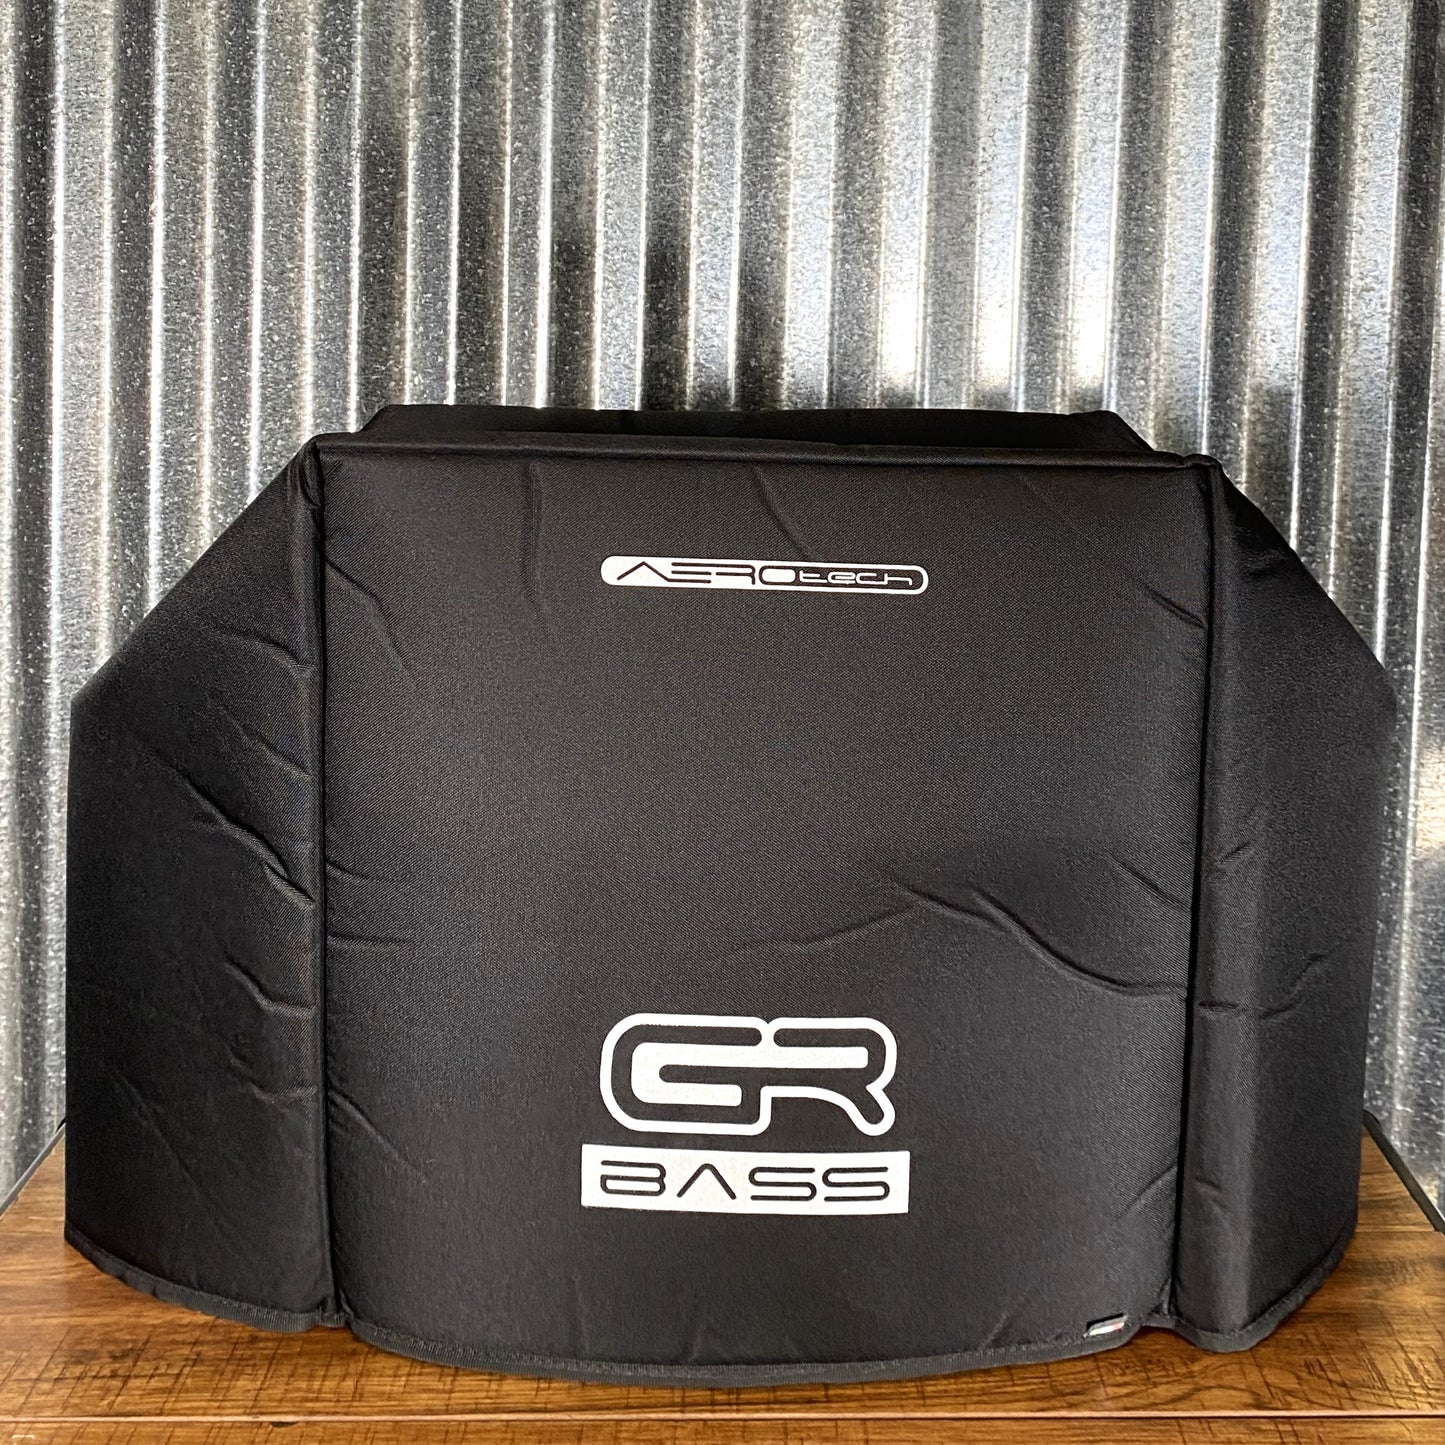 GR Bass Cover AT Cube112 and NF Cube112 Bass Speaker Cabinet